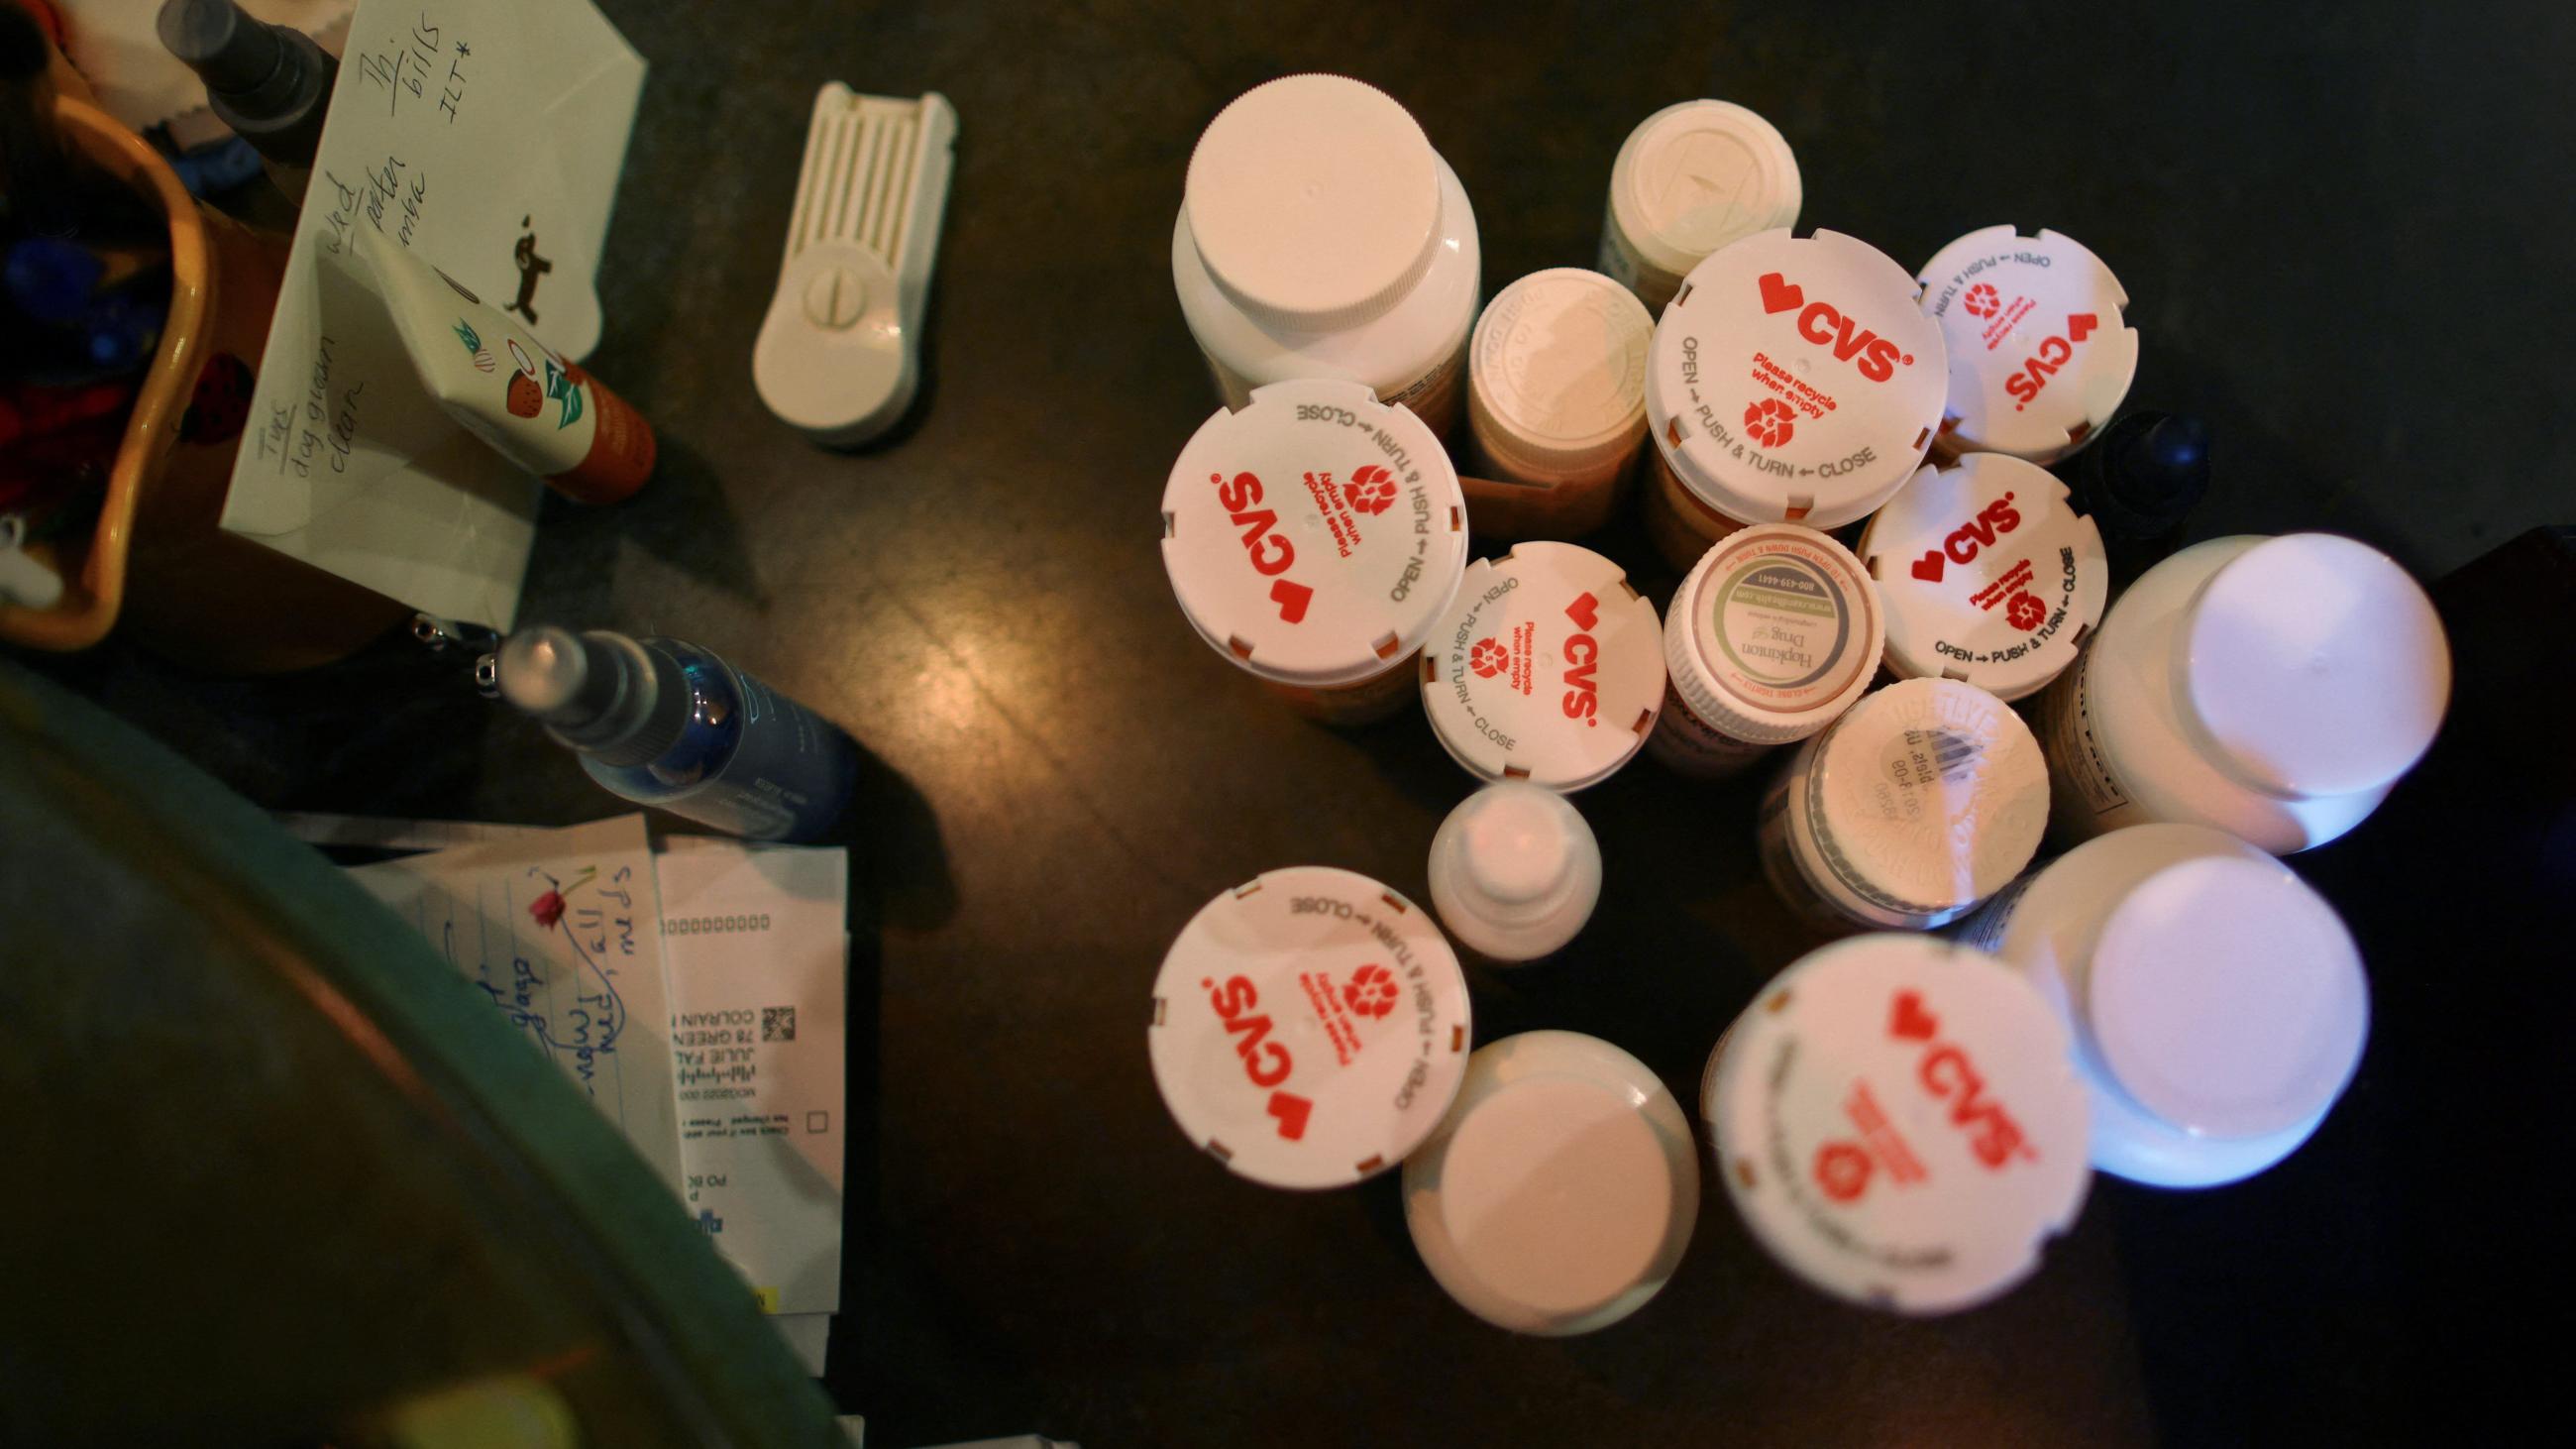 Julie Fallon, who describes her long COVID symptoms as “extreme cognitive challenges,” has her medications gathered on her kitchen counter at her home in Colrain, Massachusetts, on June 15, 2022.